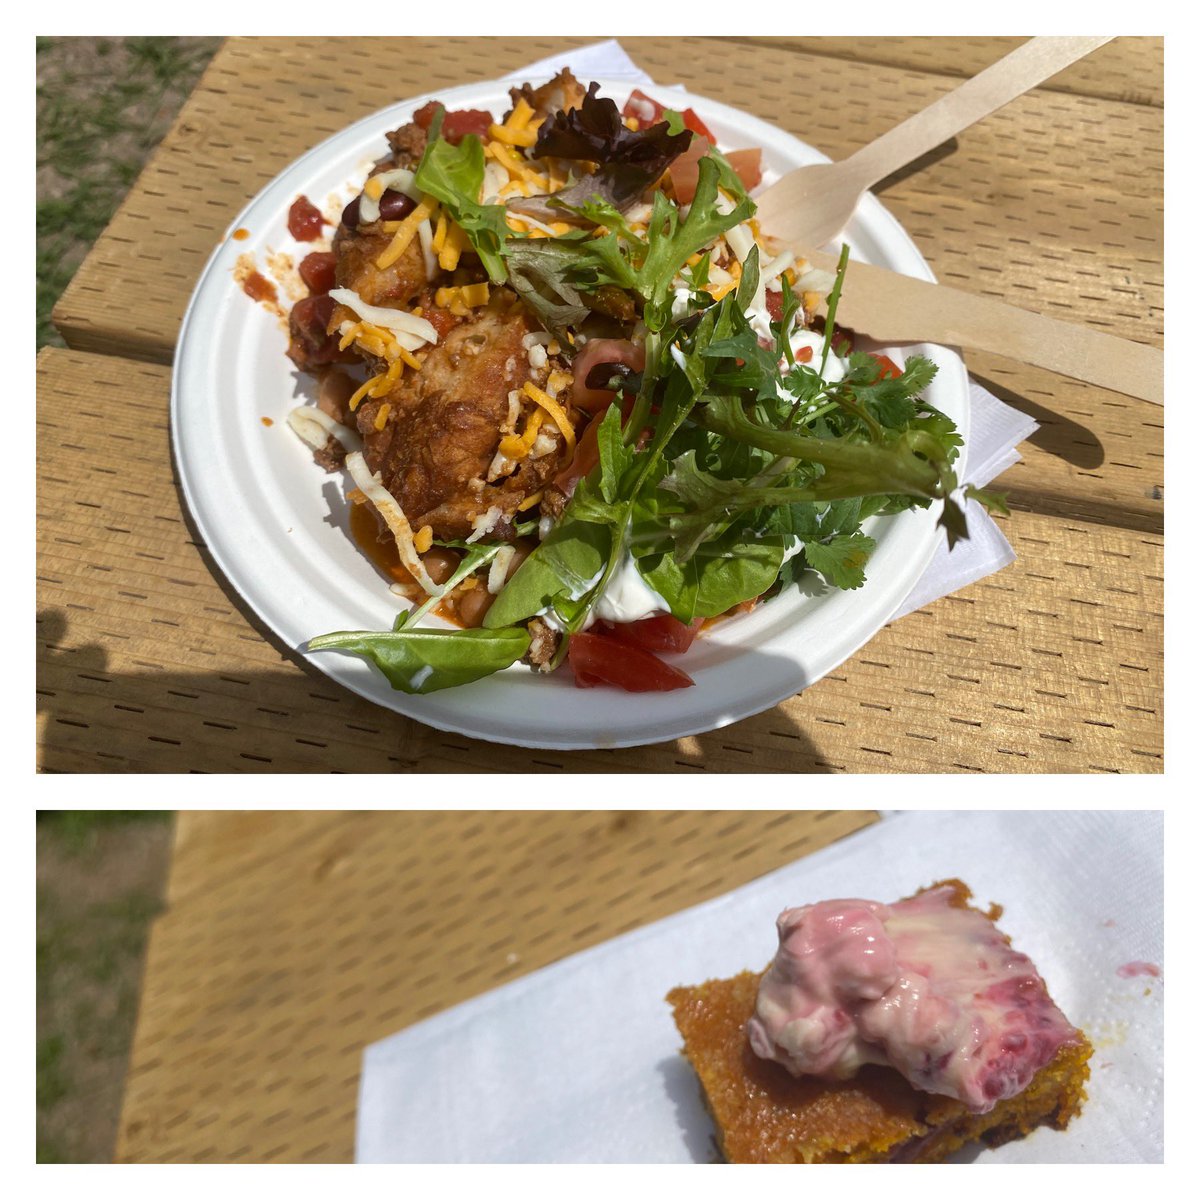 Great day at #PEELEYC learning & exploring their playscapes. I feel honoured to learn from Indigenous presenters who taught us about Indigenous ways of knowing. Enjoyed an amazing lunch of bison chili on fry bread; reconnected w/ some familiar faces & made new connections as well